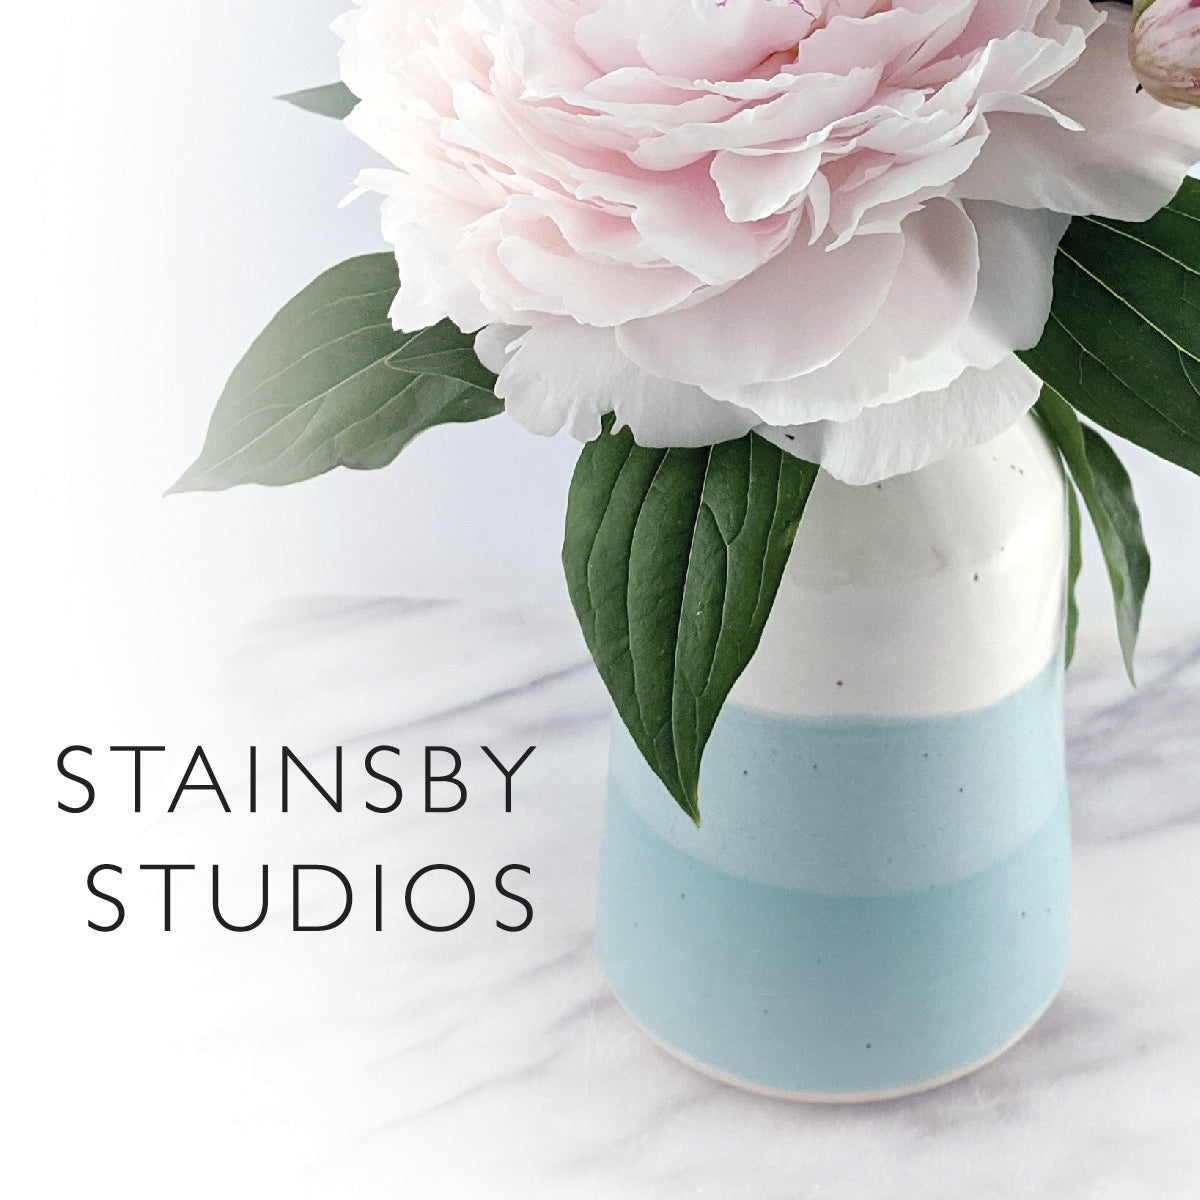 Beautiful white and turquoise vase holding a pink peony with the text Stainsby Studios on the bottom left